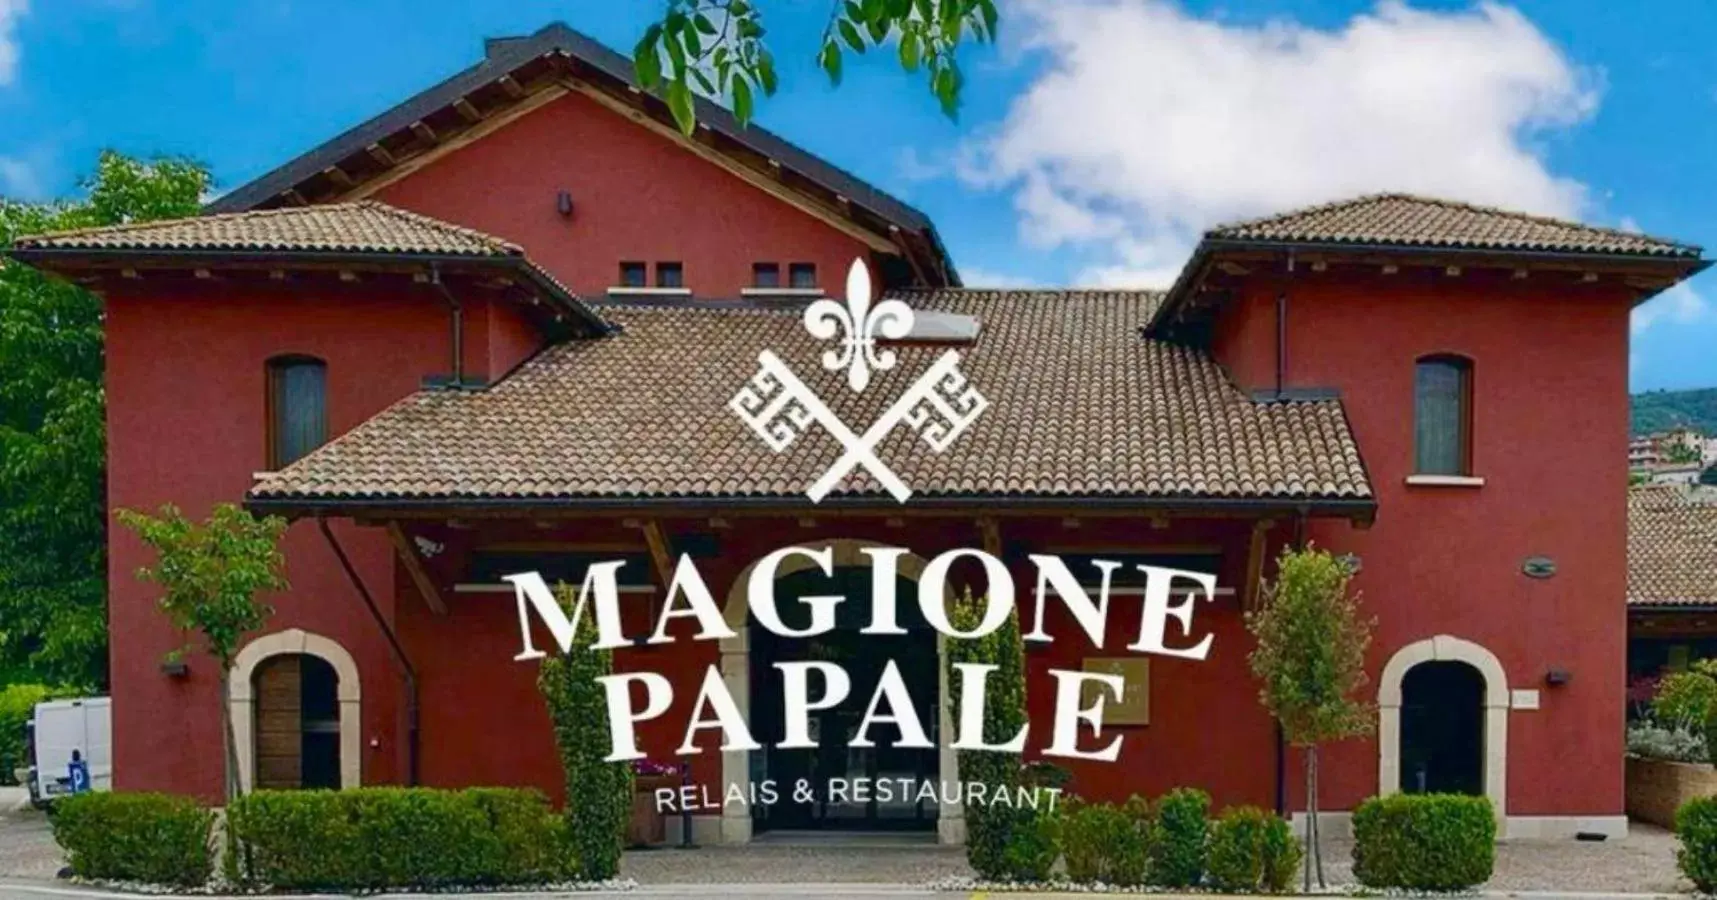 Property Building in Magione Papale Relais